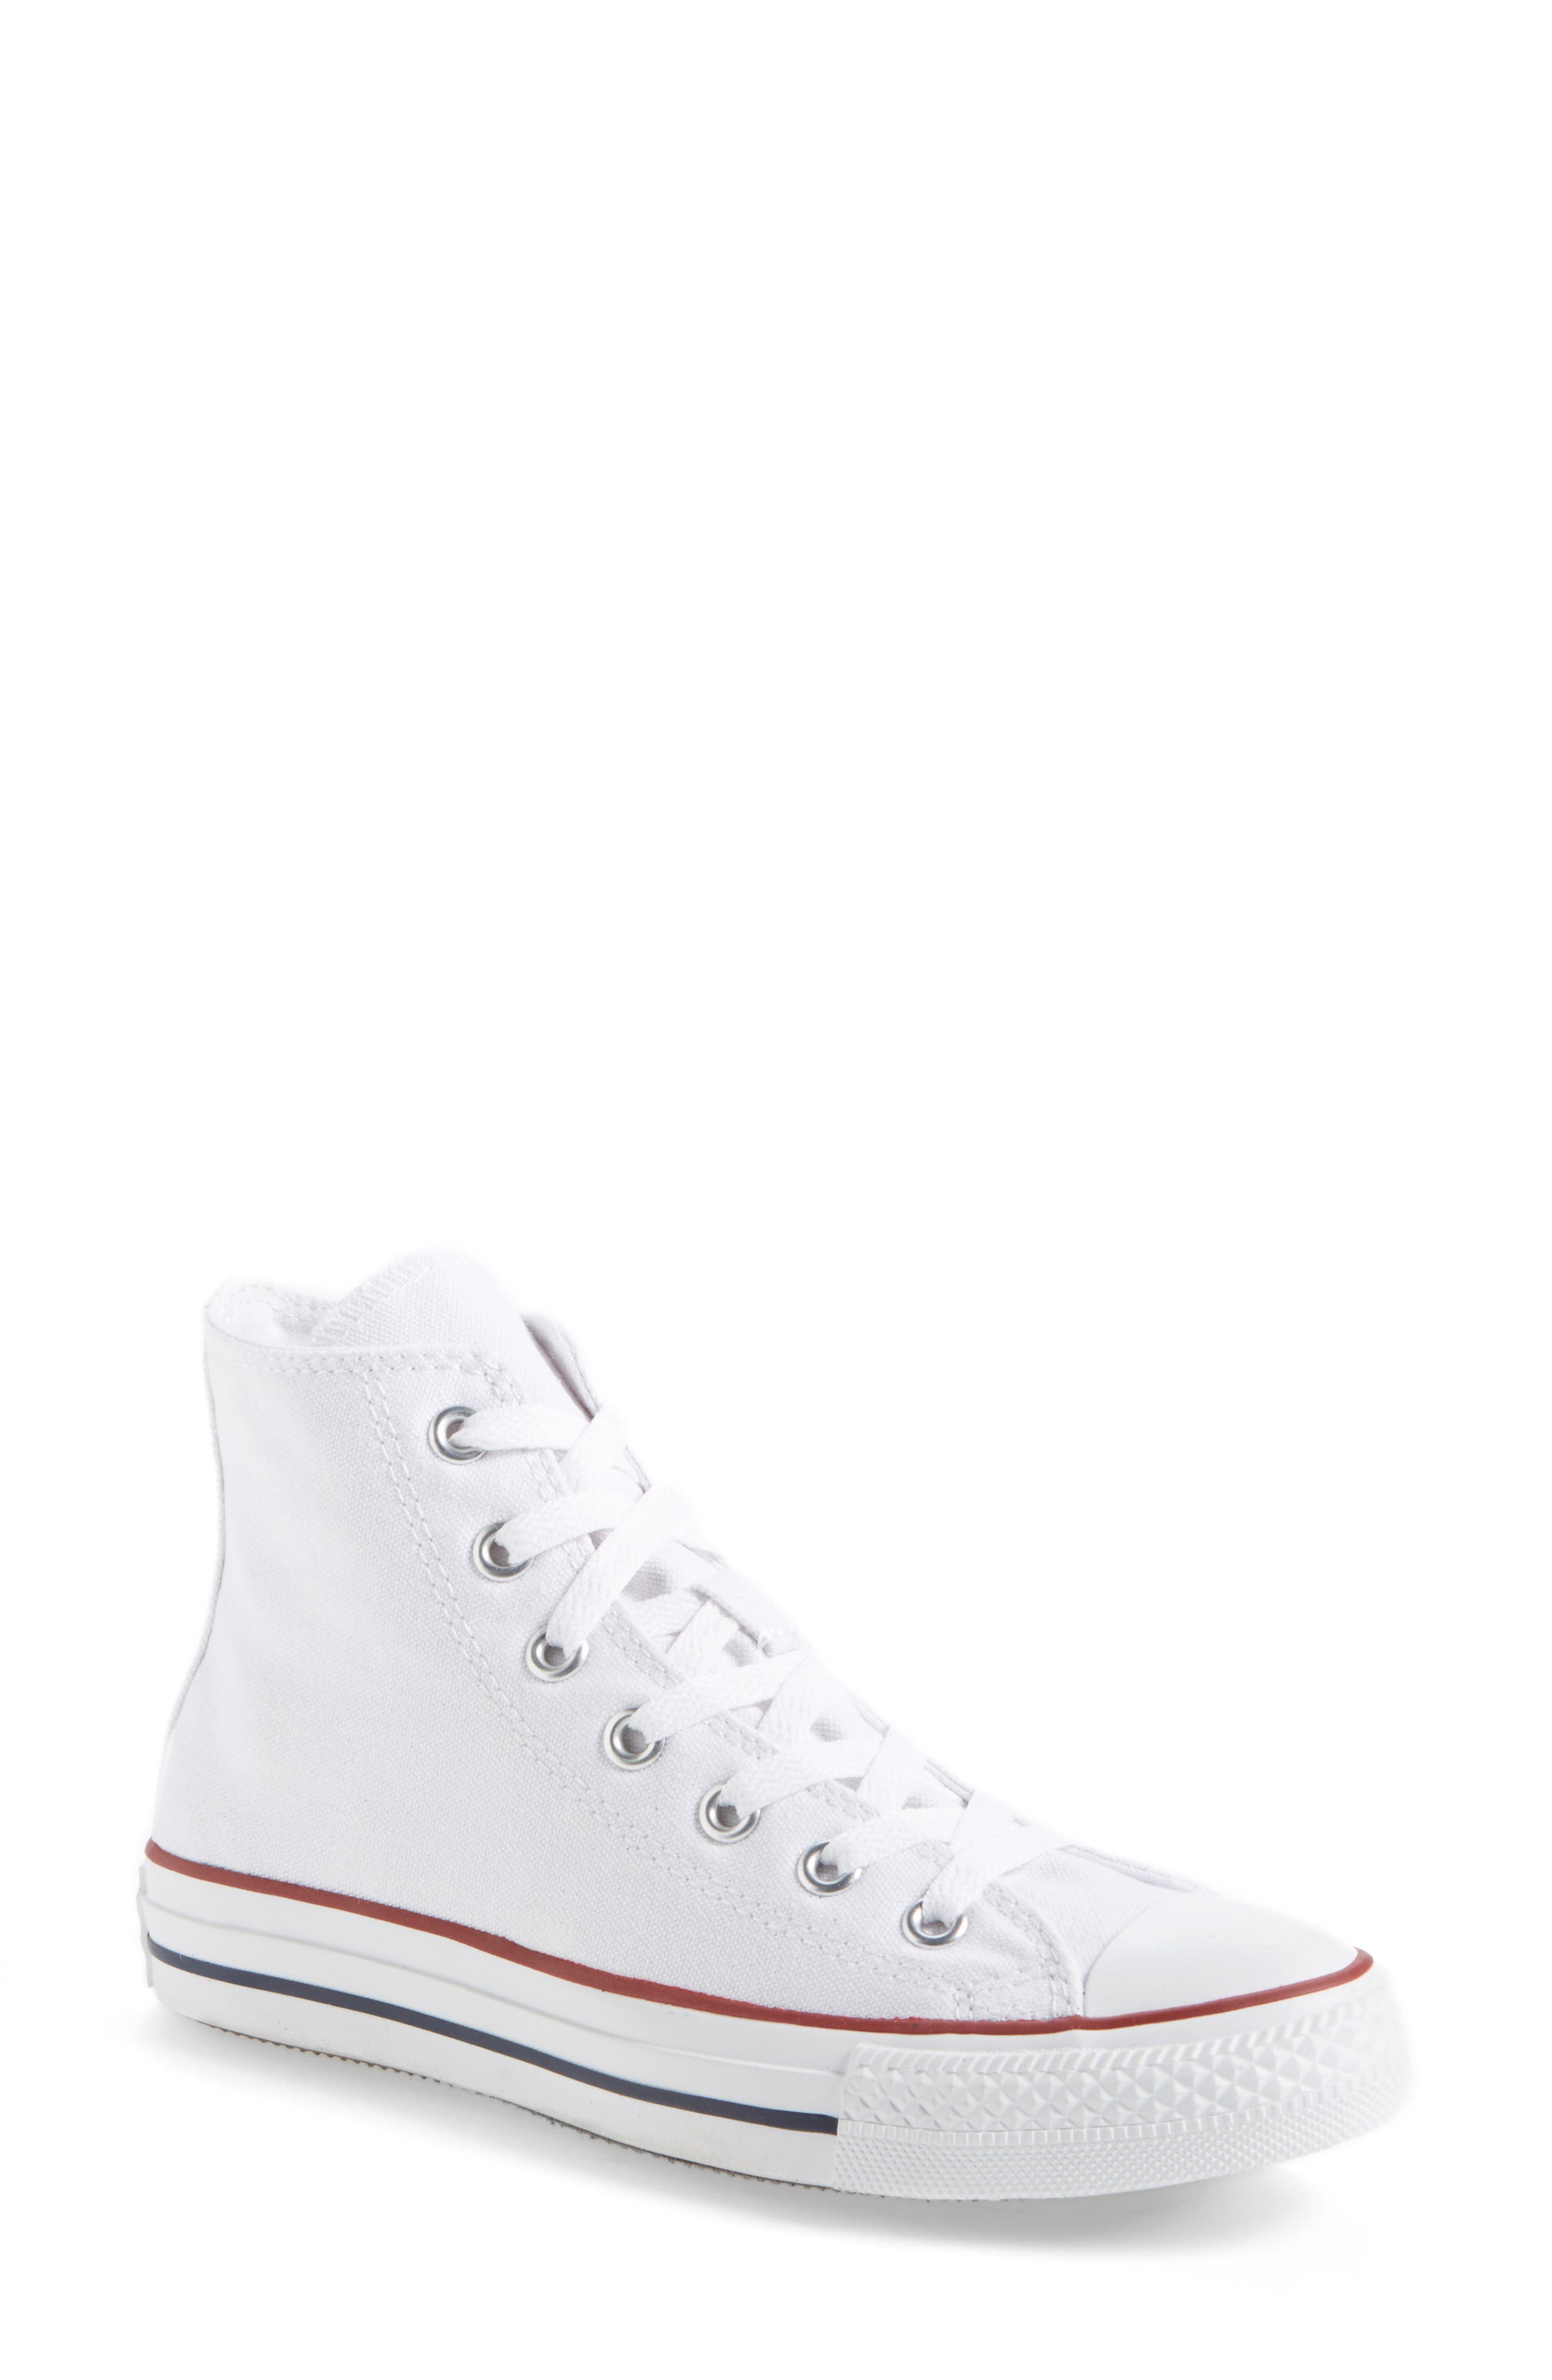 where can i get white converse